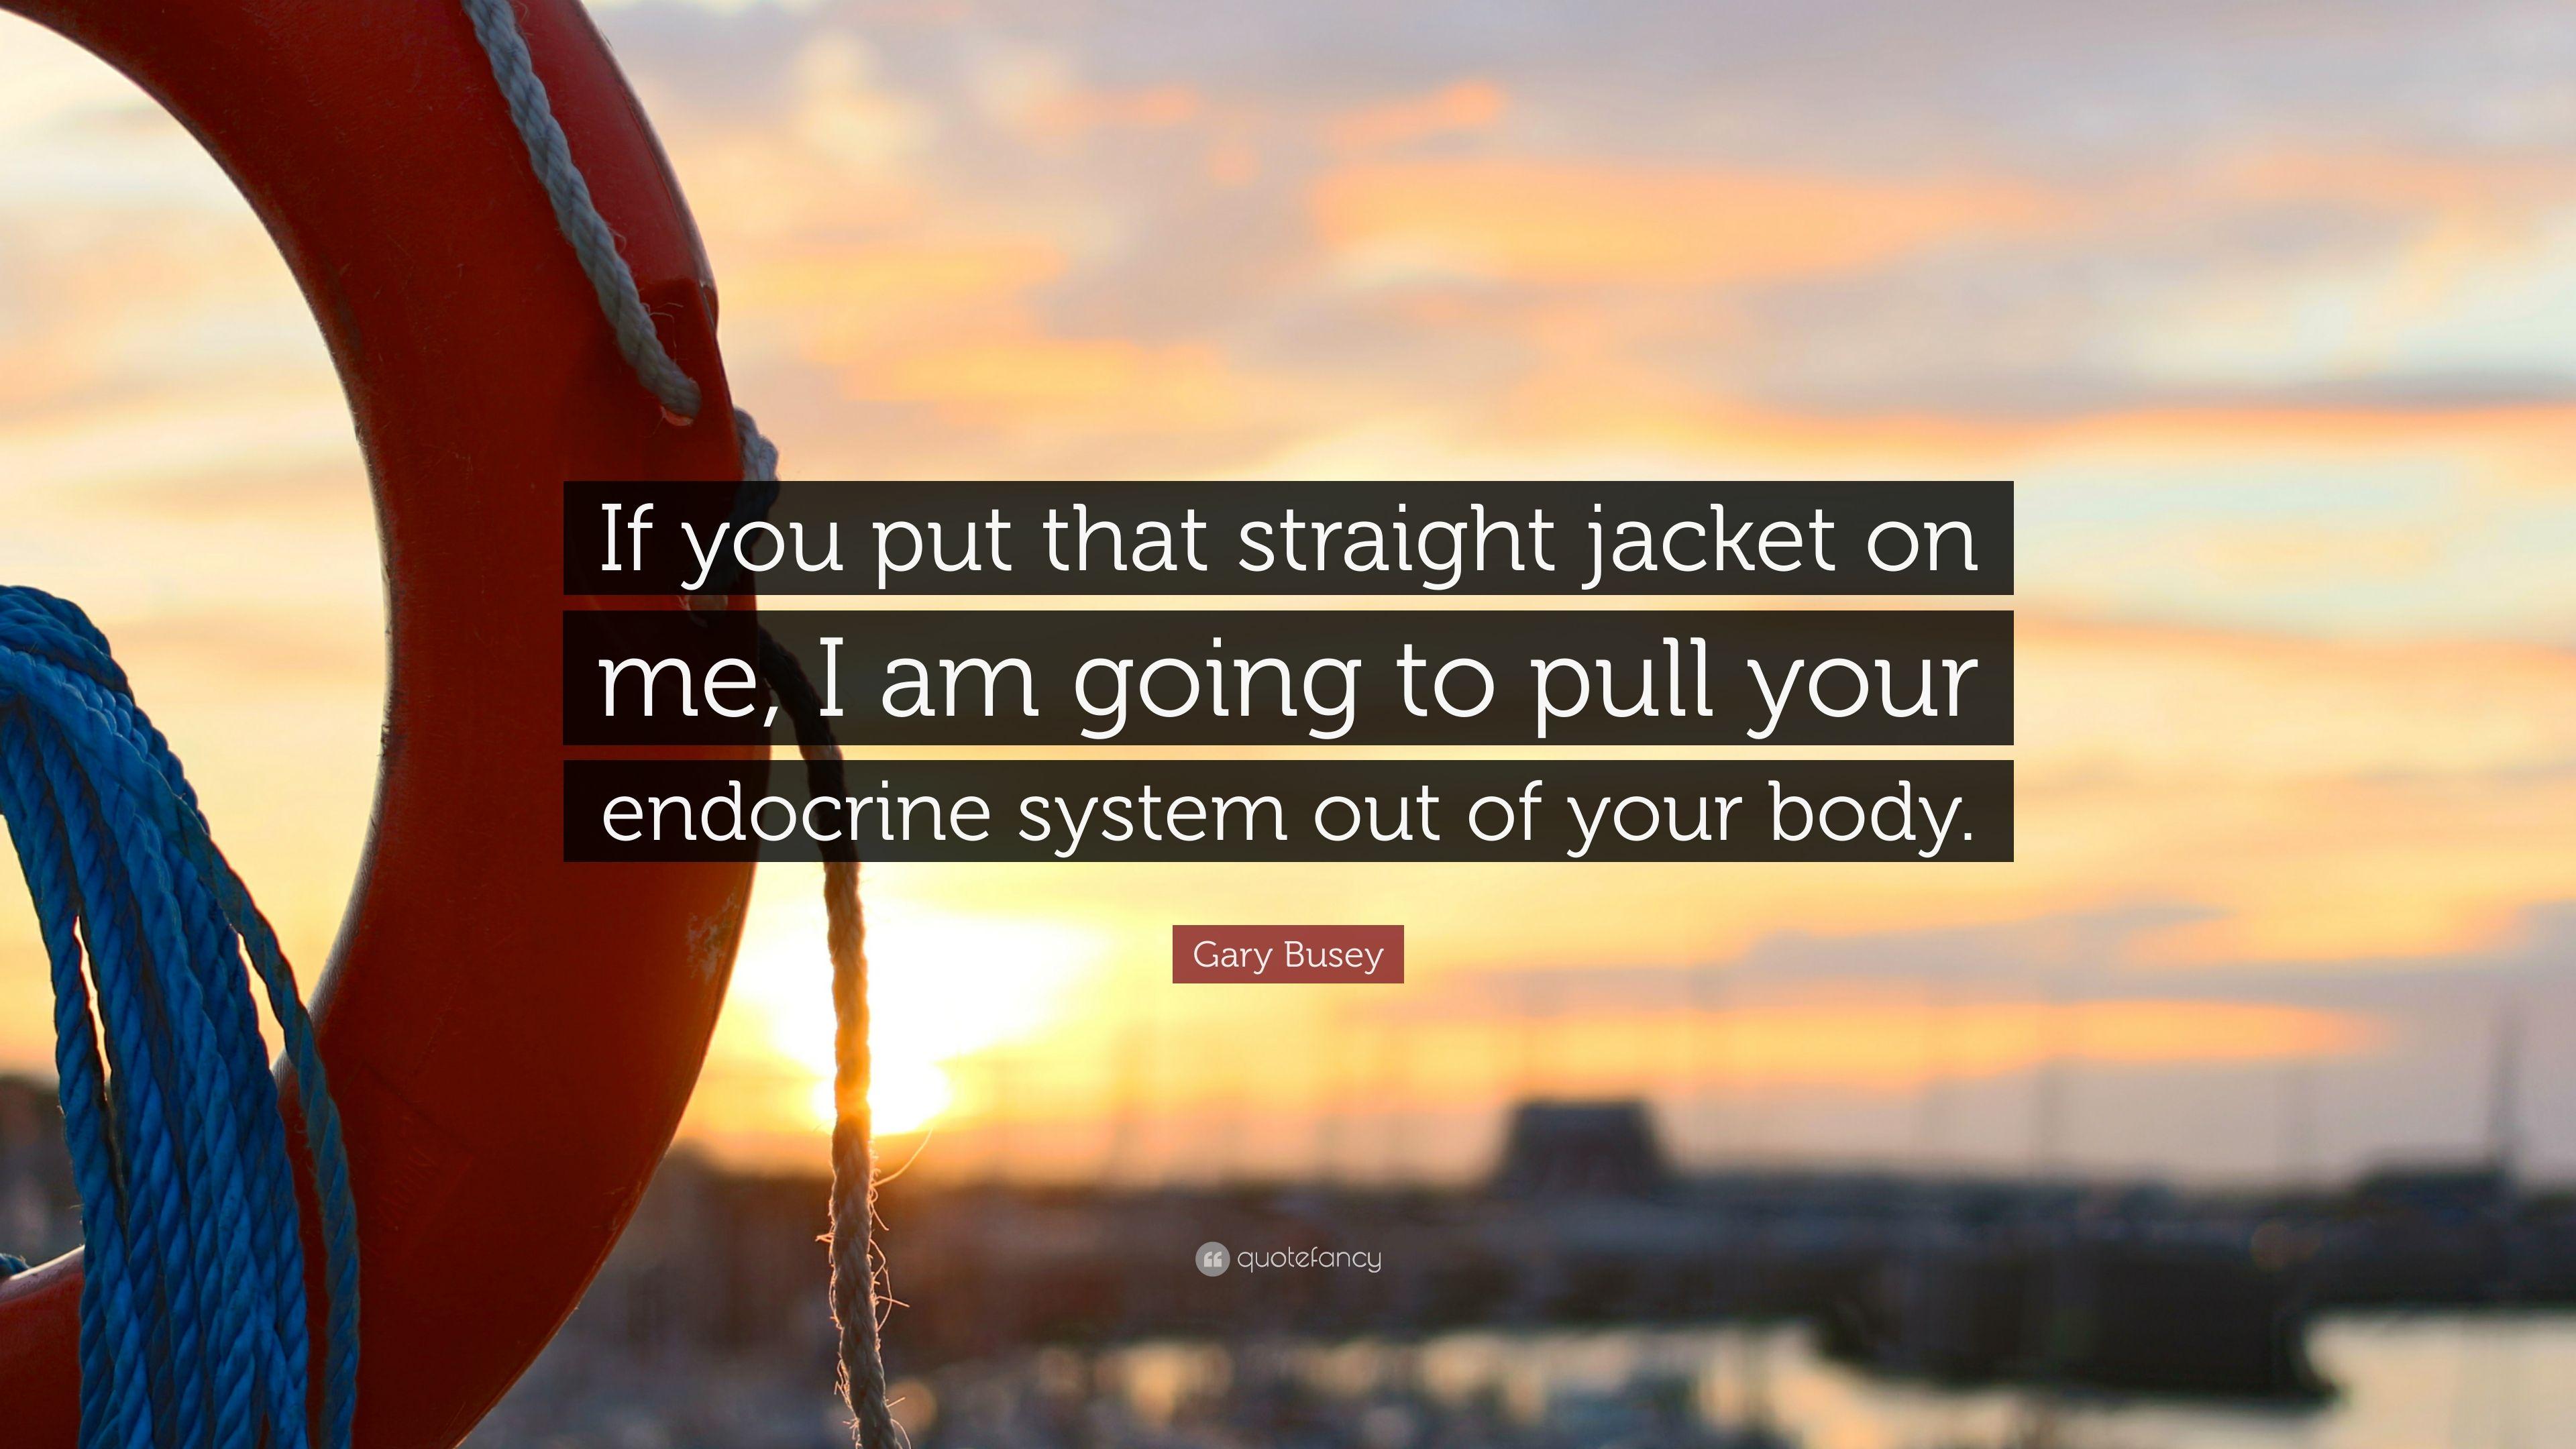 Gary Busey Quote: “If you put that straight jacket on me, I am